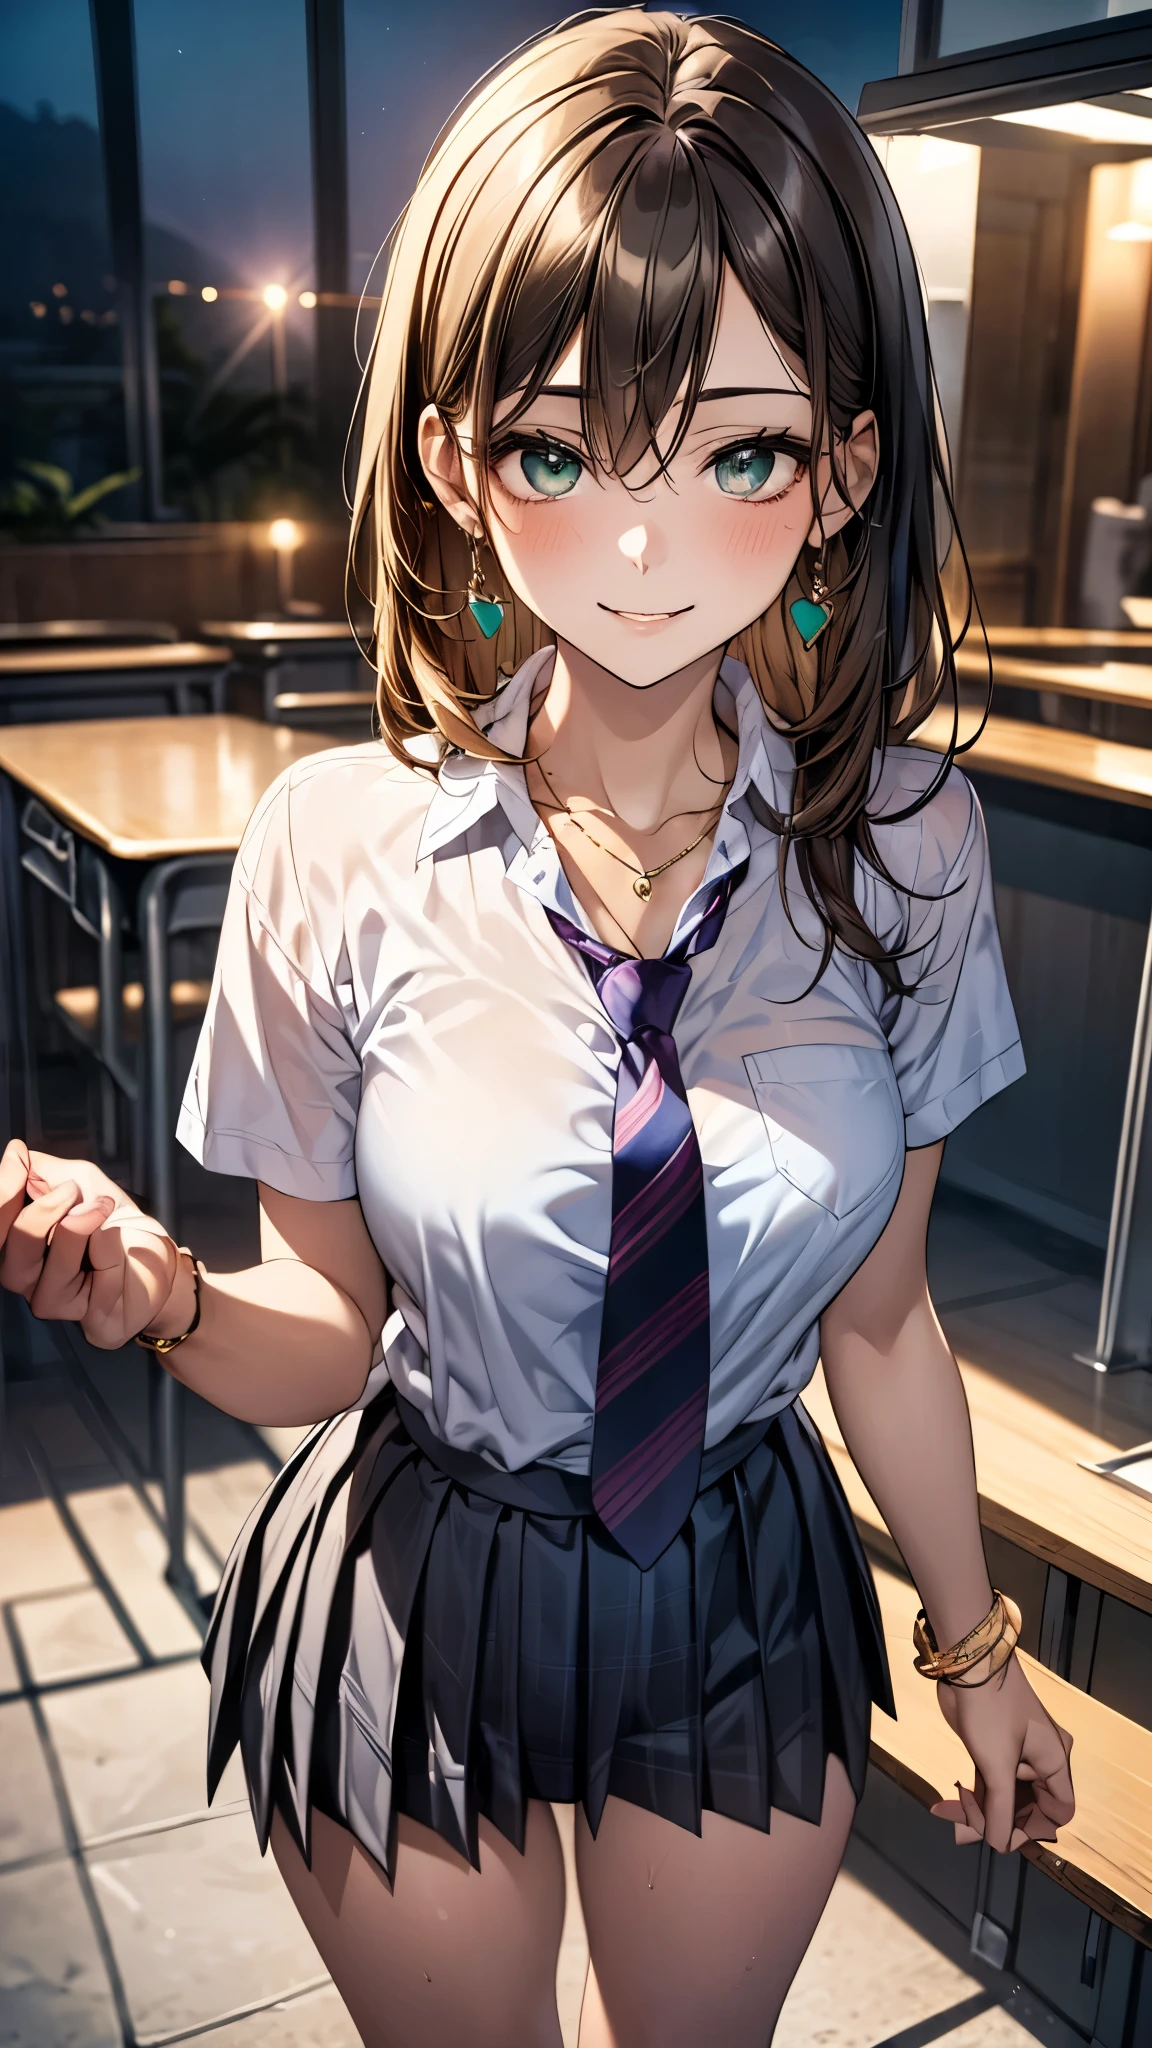 (masterpiece:1.3, top-quality), ultra high res, ultra detailed, (realistic, photorealistic:1.4), beautiful illustration, perfect lighting, colorful, depth of fields, 
looking at viewer, full body, 1 girl, japanese, high school girl, perfect face, (perfect anatomy, anatomically correct), cute and symmetrical face, babyface, suntan, shiny skin, 
(middle hair:0.8, straight hair:1.4, blond hair), hair between eyes, emerald green eyes, long eye lasher, (medium breasts), slender, 
beautiful hair, beautiful face, beautiful detailed eyes, beautiful clavicle, beautiful body, beautiful chest, beautiful thigh, beautiful legs, beautiful fingers, 
((collared short sleeve shirt, light blue shirt, , grey plaid pleated skirt, navy tie), golden heart necklace, wrist chakra), light blue panties, 
(beautiful scenery), school, (liftting skirt, standing, open legs), (lovely smile, in heat), 